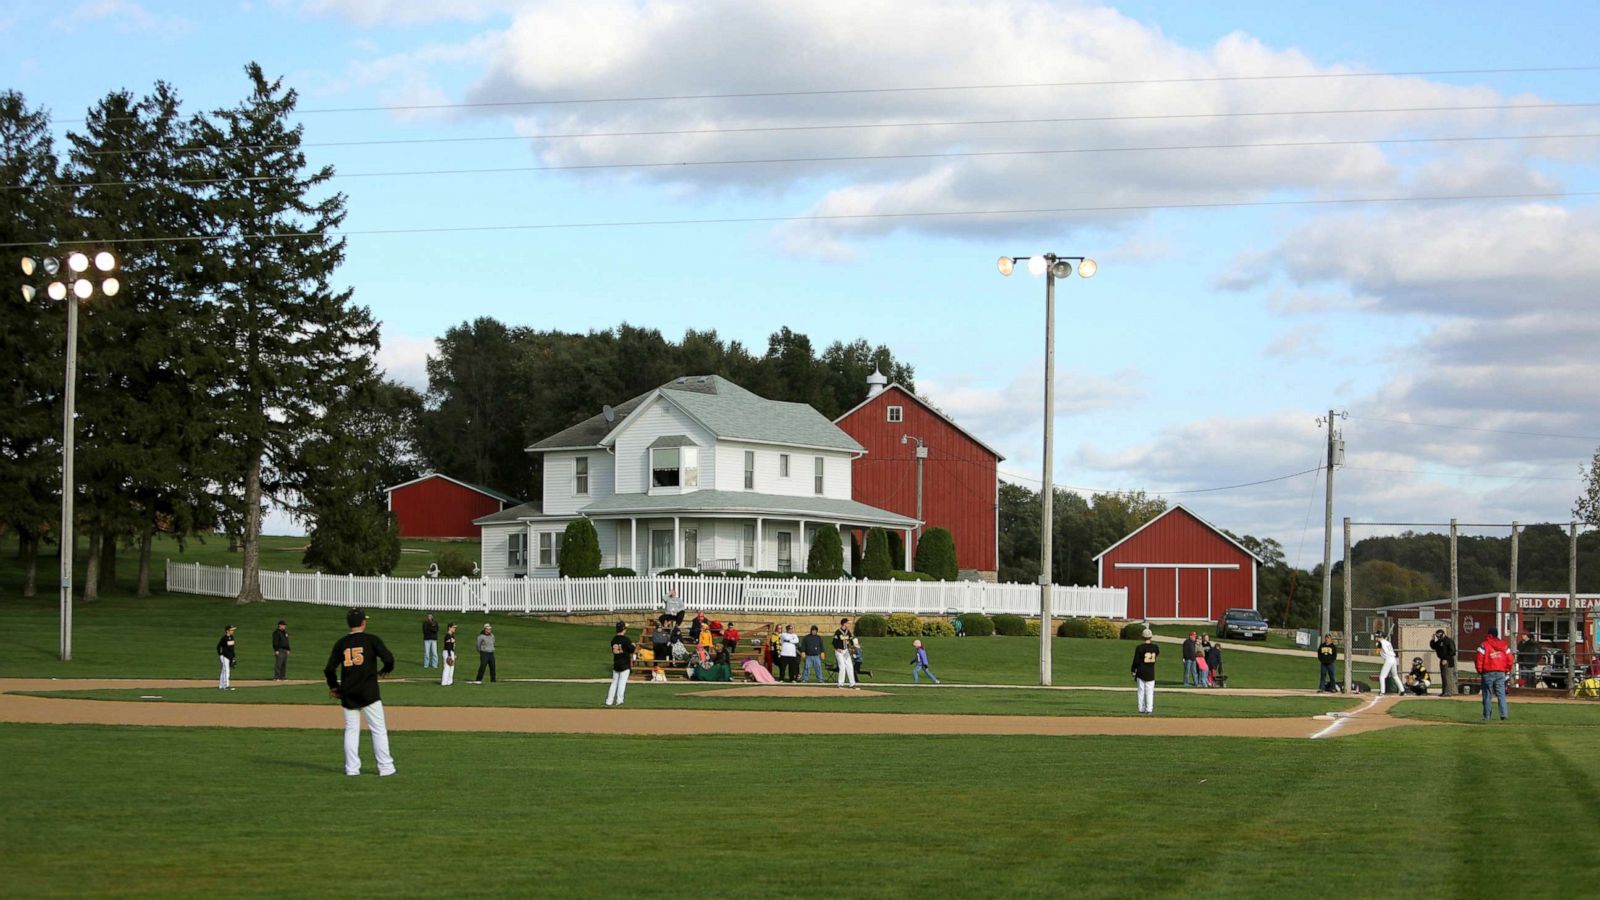 Yankees, White Sox to play game at 'Field of Dreams' in Iowa - ABC